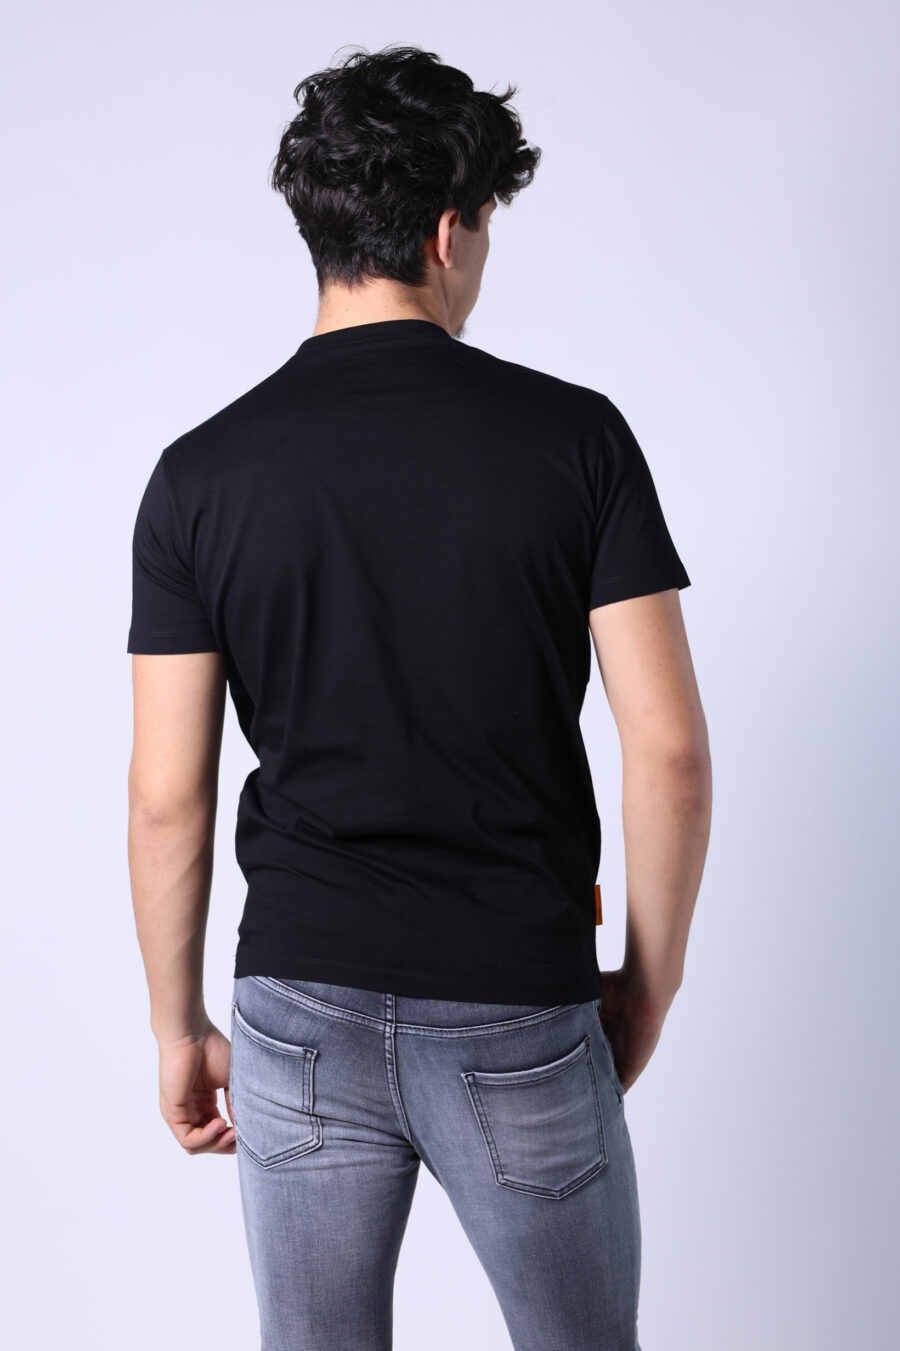 Black t-shirt with "pac-man" ghost maxi logo - Untitled Catalog 05638